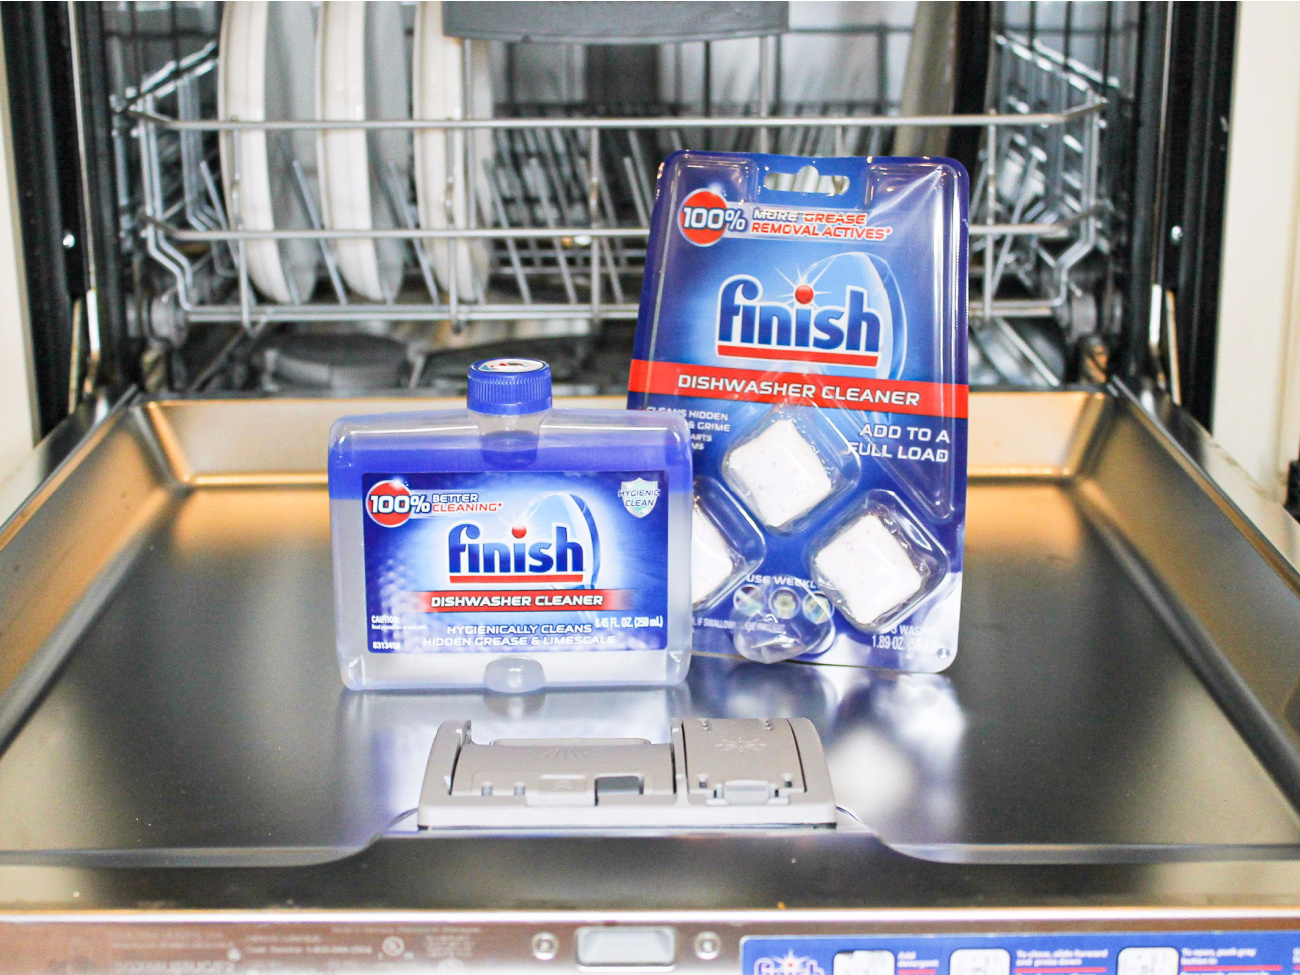 Save On Finish Dishwasher Cleaner This Week At Publix – As Low As $1.39